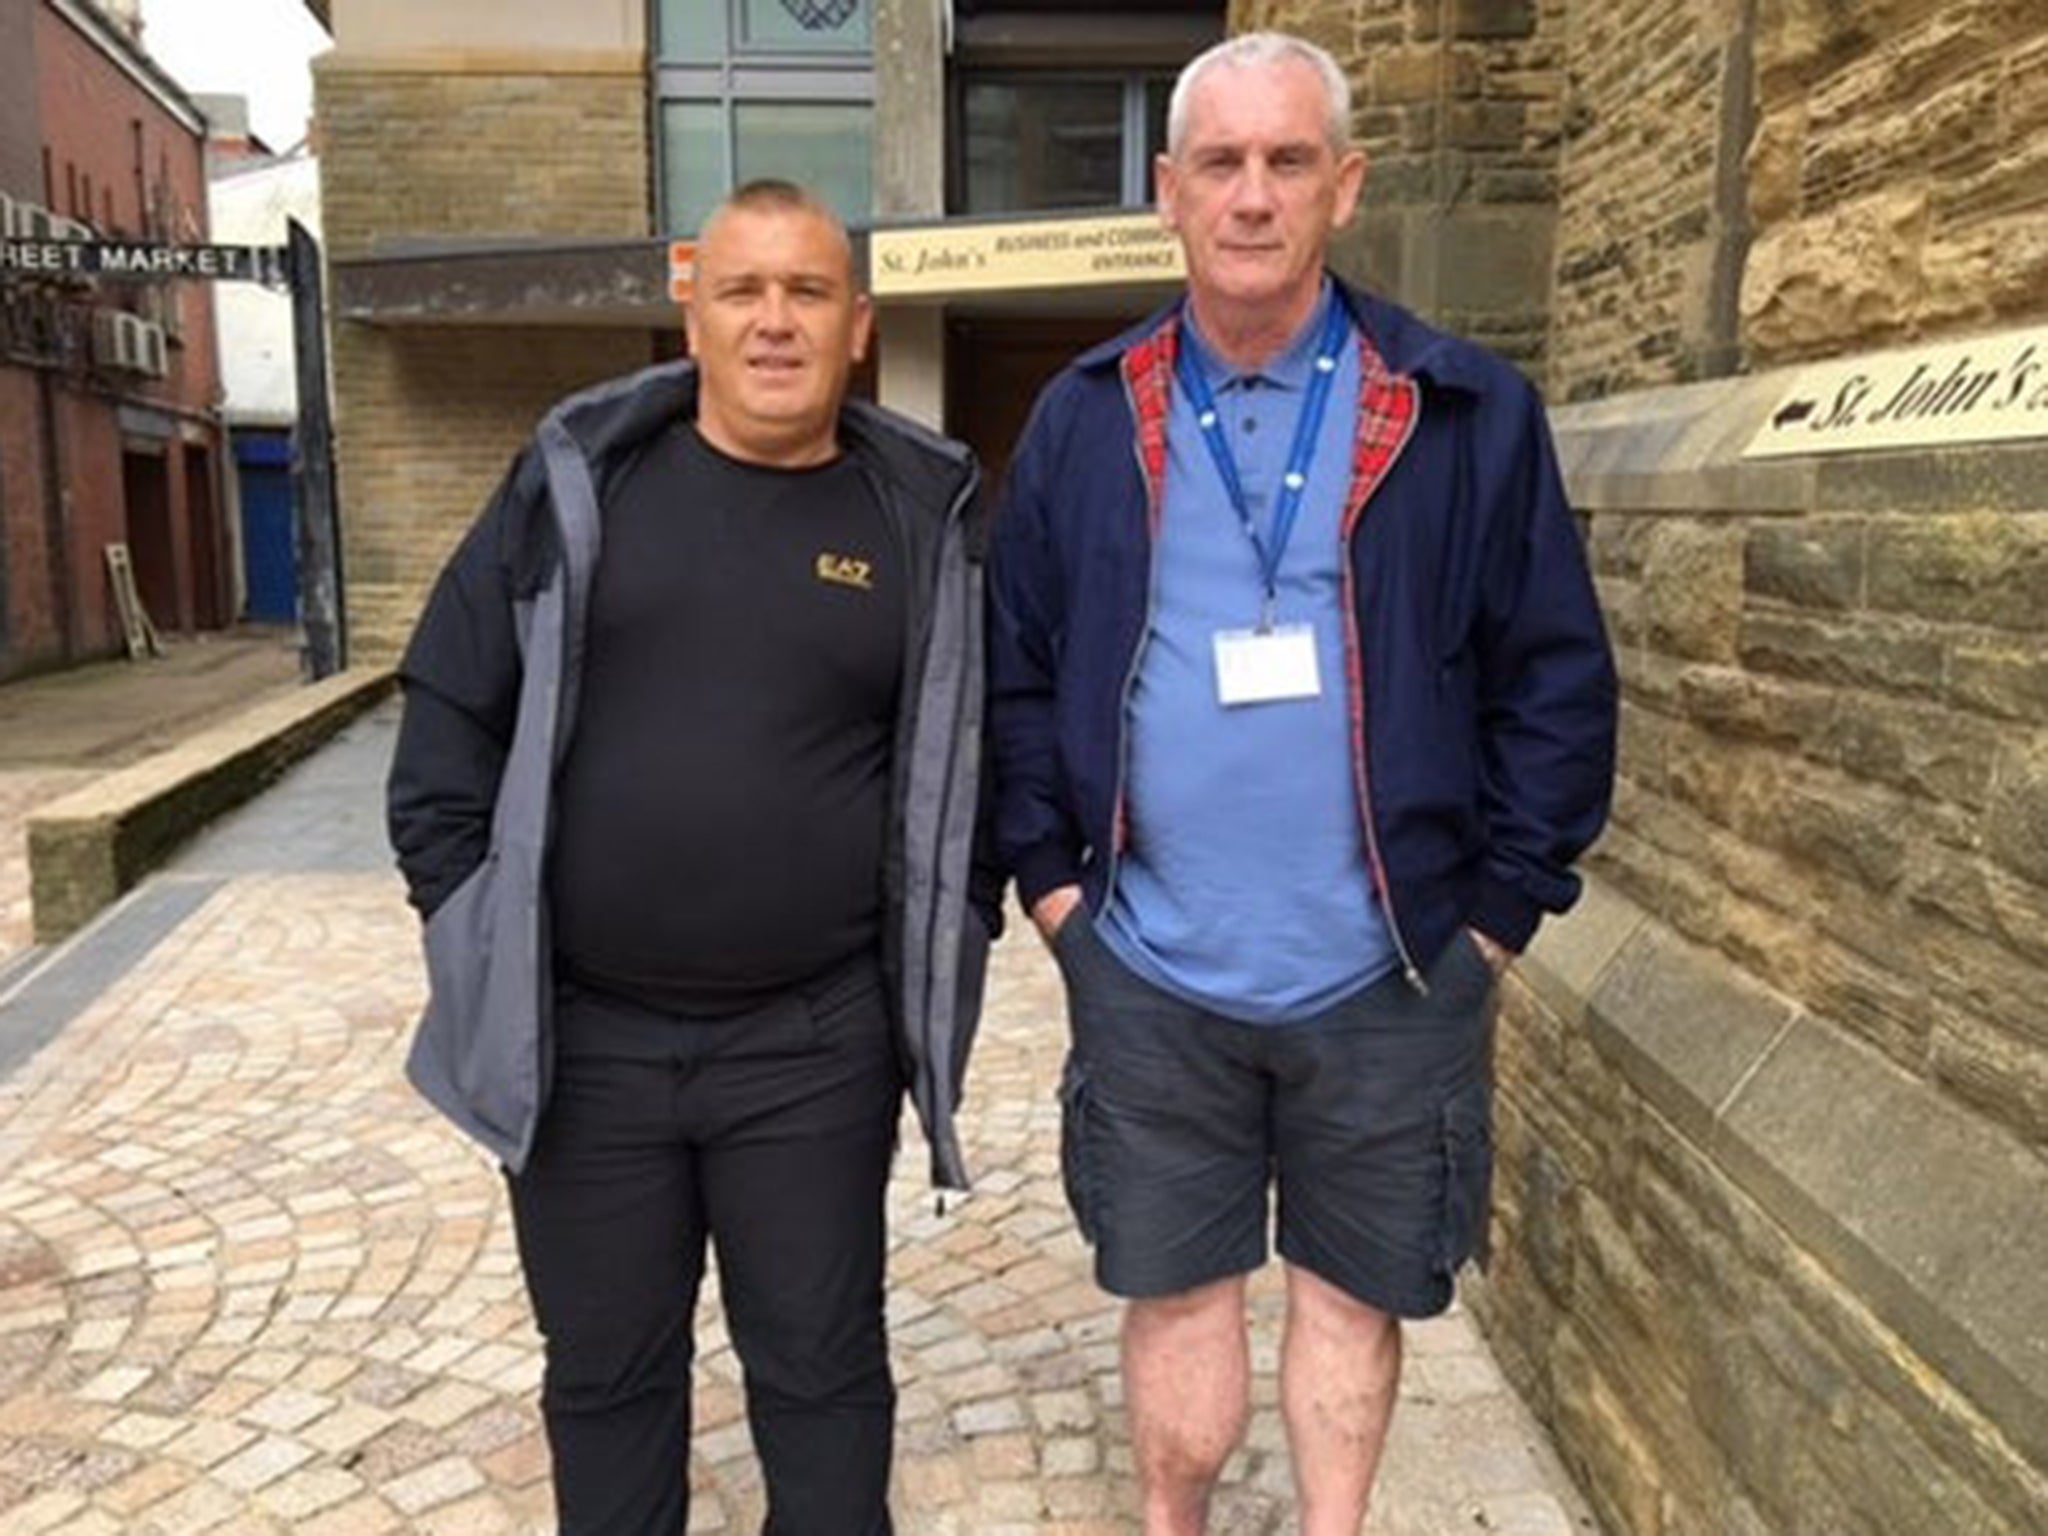 Steve Brown, left, and David Wilson, members of Blackpool’s Lived Experience Team